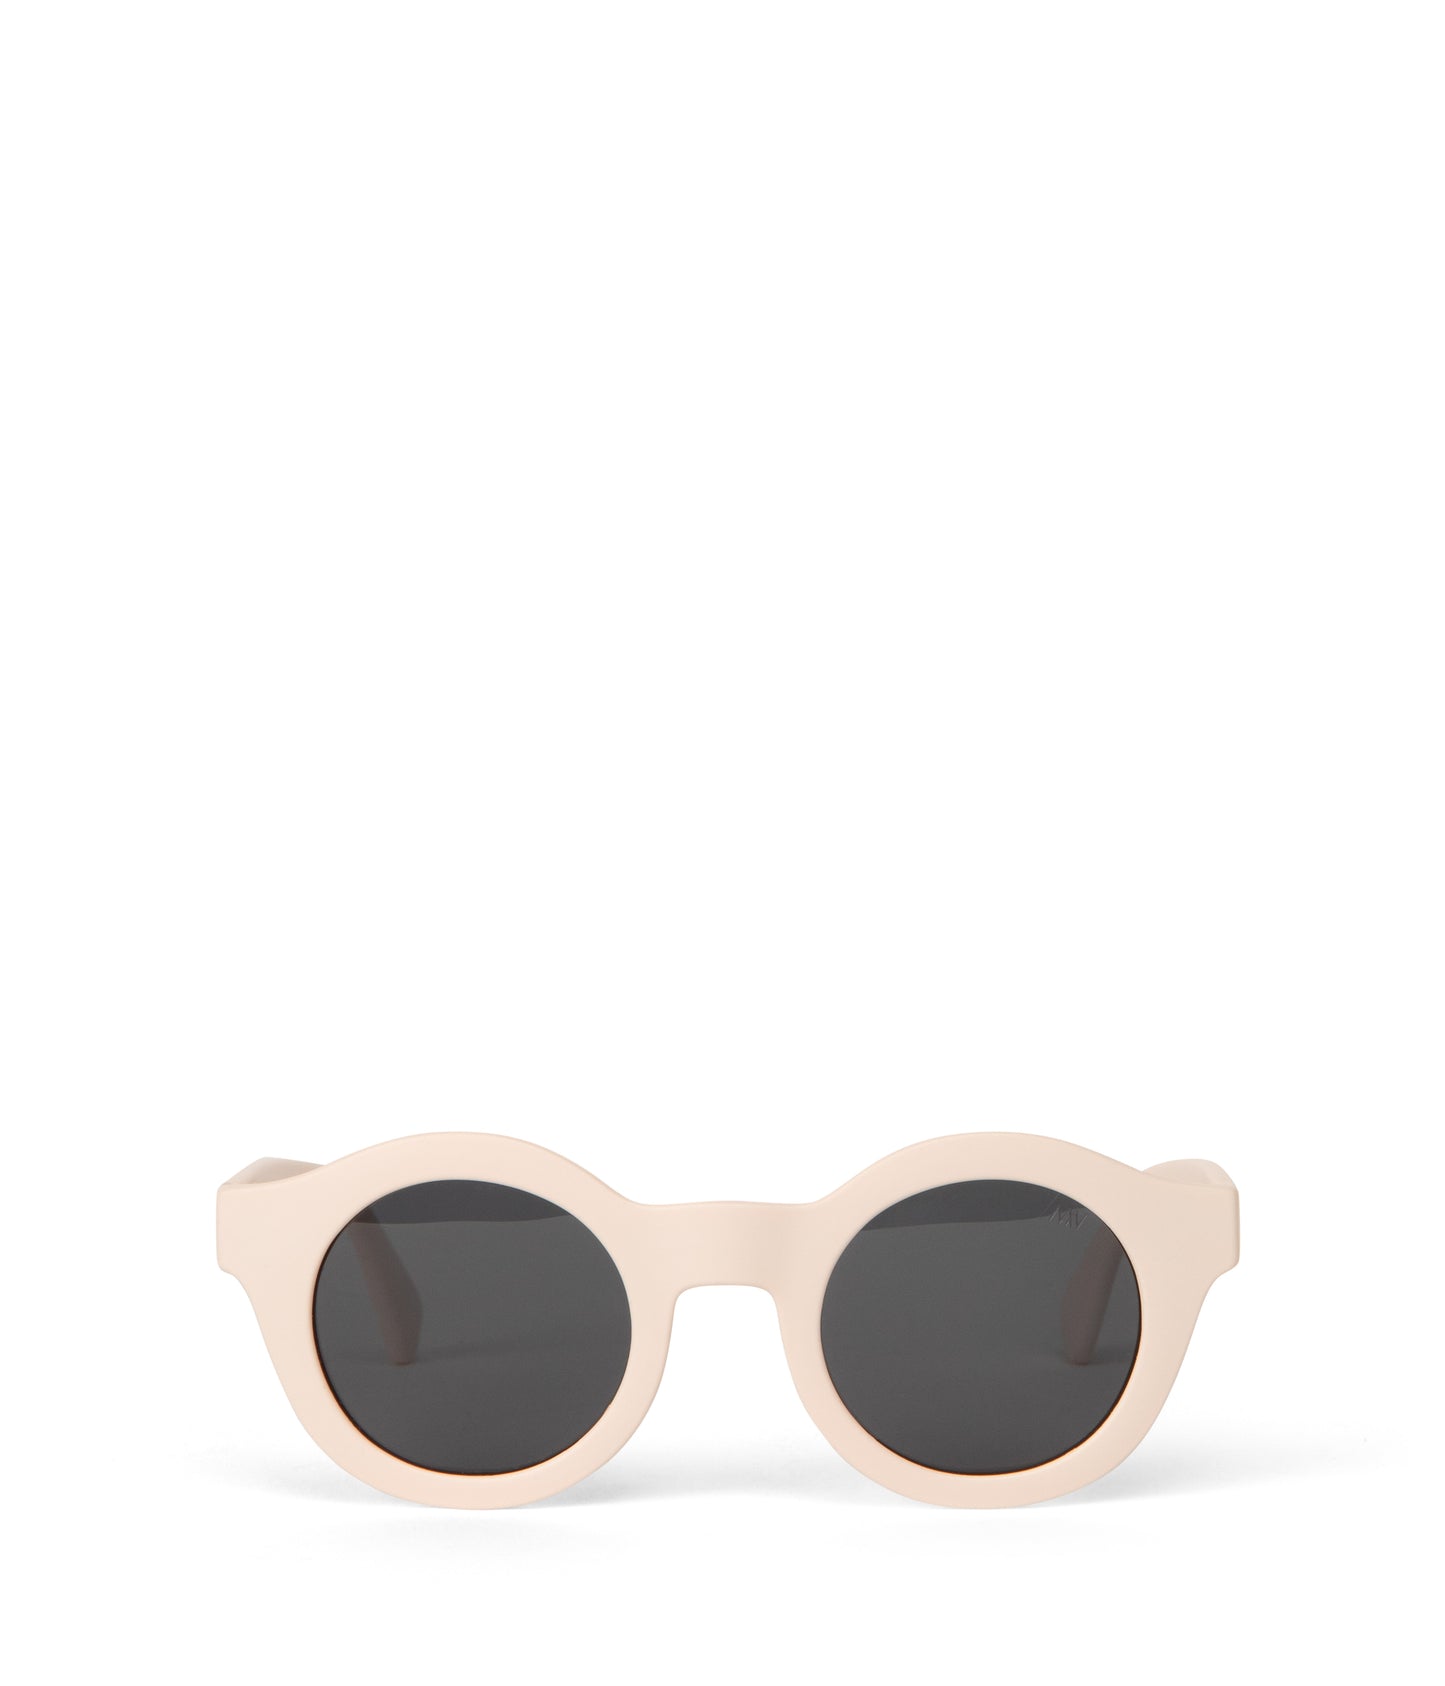 SURIE-2 Recycled Round Sunglasses | Color: White, Grey - variant::white